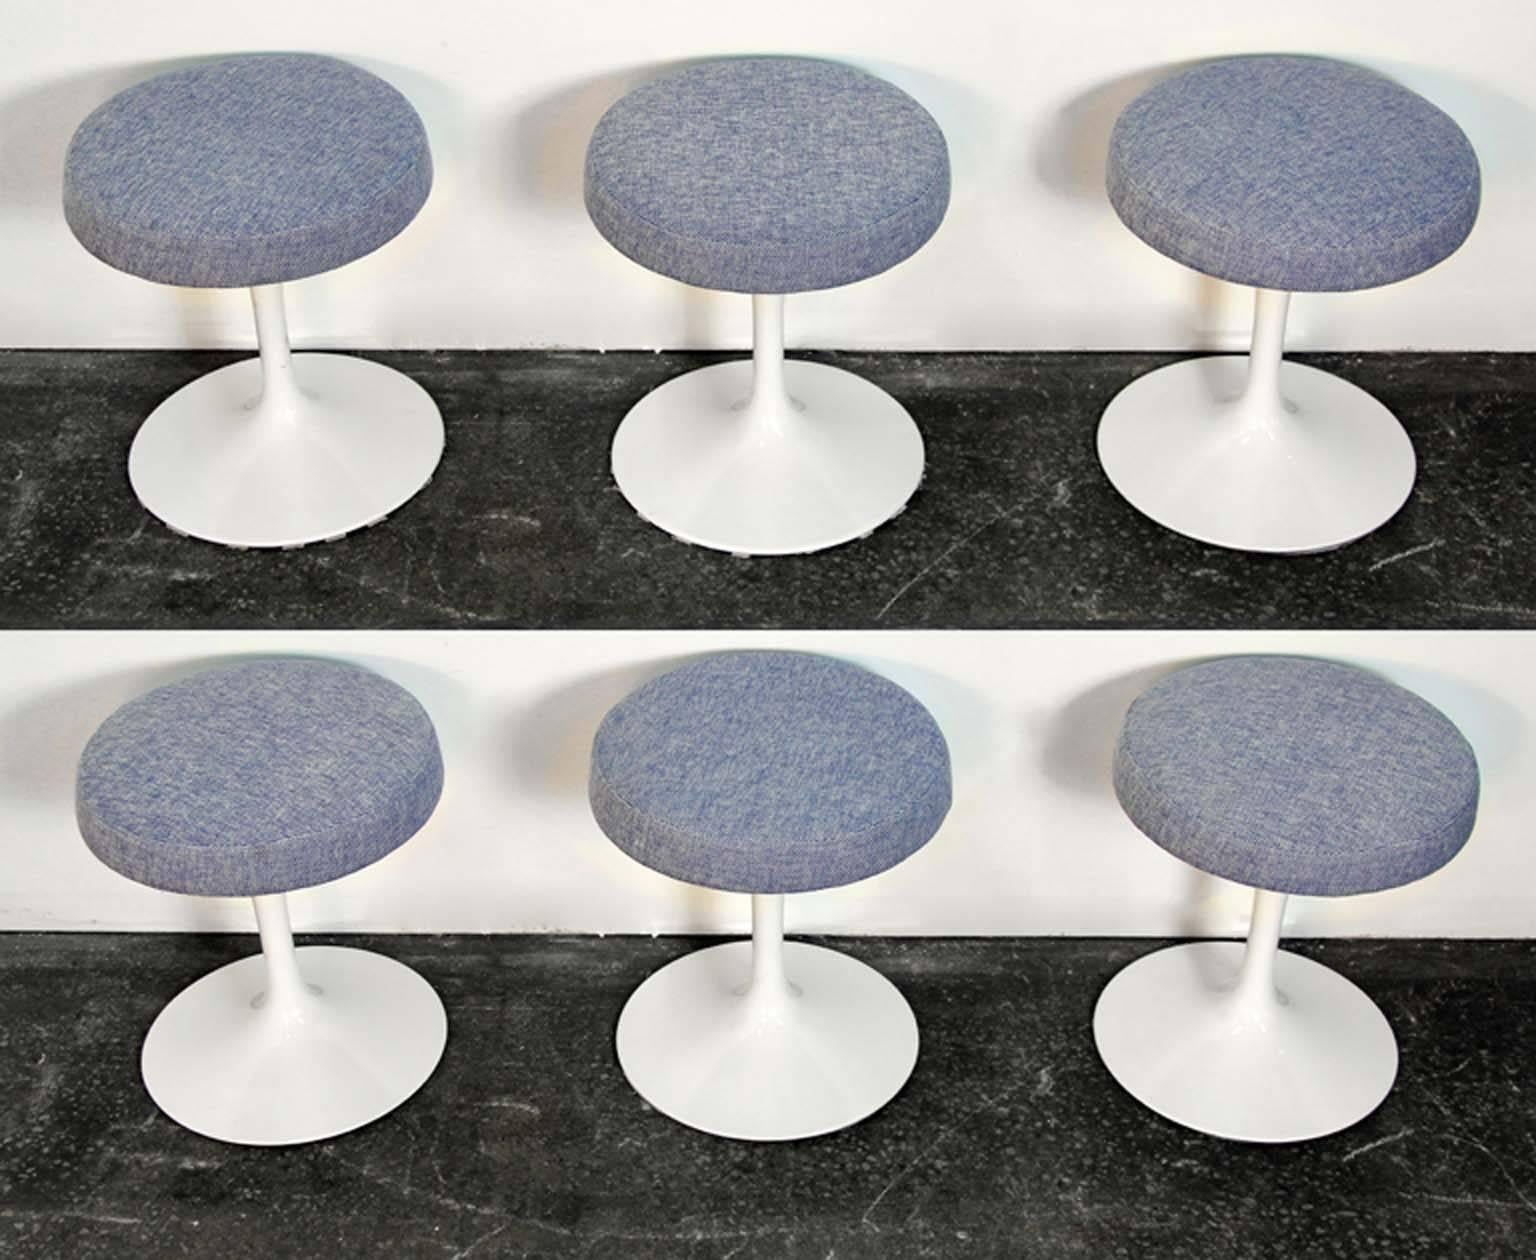 Set of six swivel tulip stools designed by Eero Saarinen in 1956 for Knoll. Newly lacquered and upholstered with original Knoll labels. These stools were featured in a Mad Men cocktail scene.